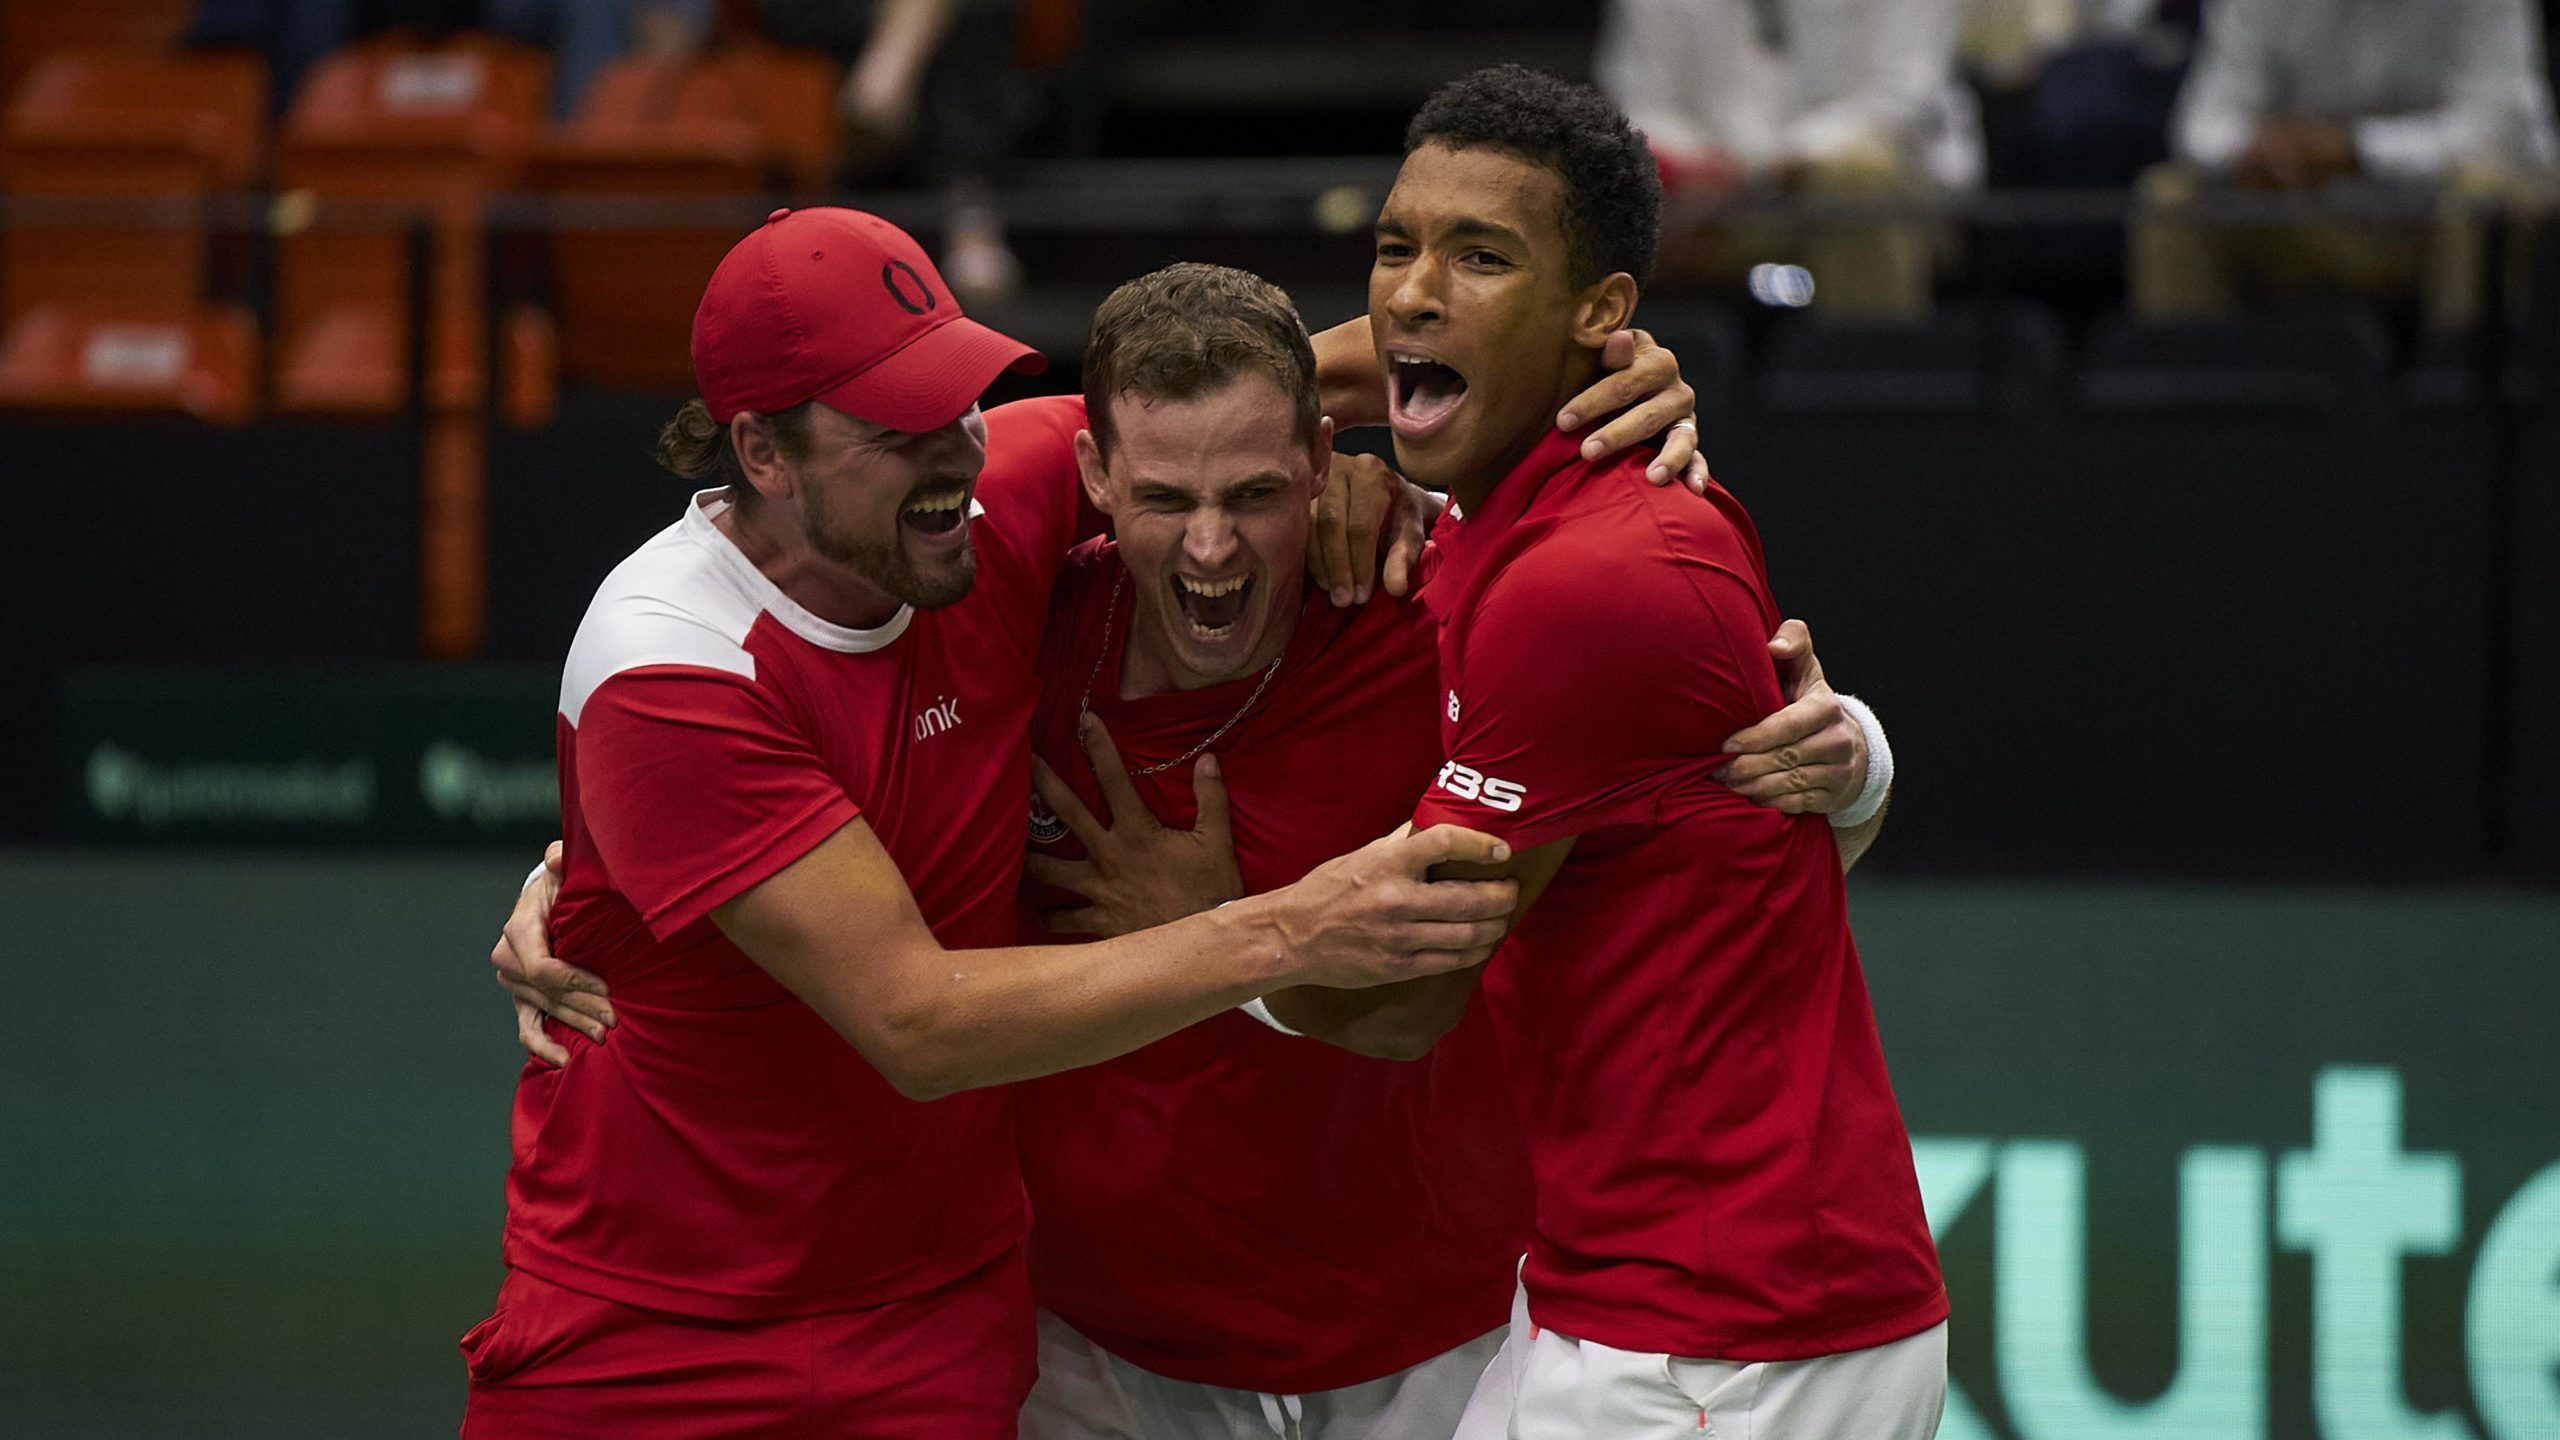 Team Canada Search for Second Davis Cup Juniors Title in Spain